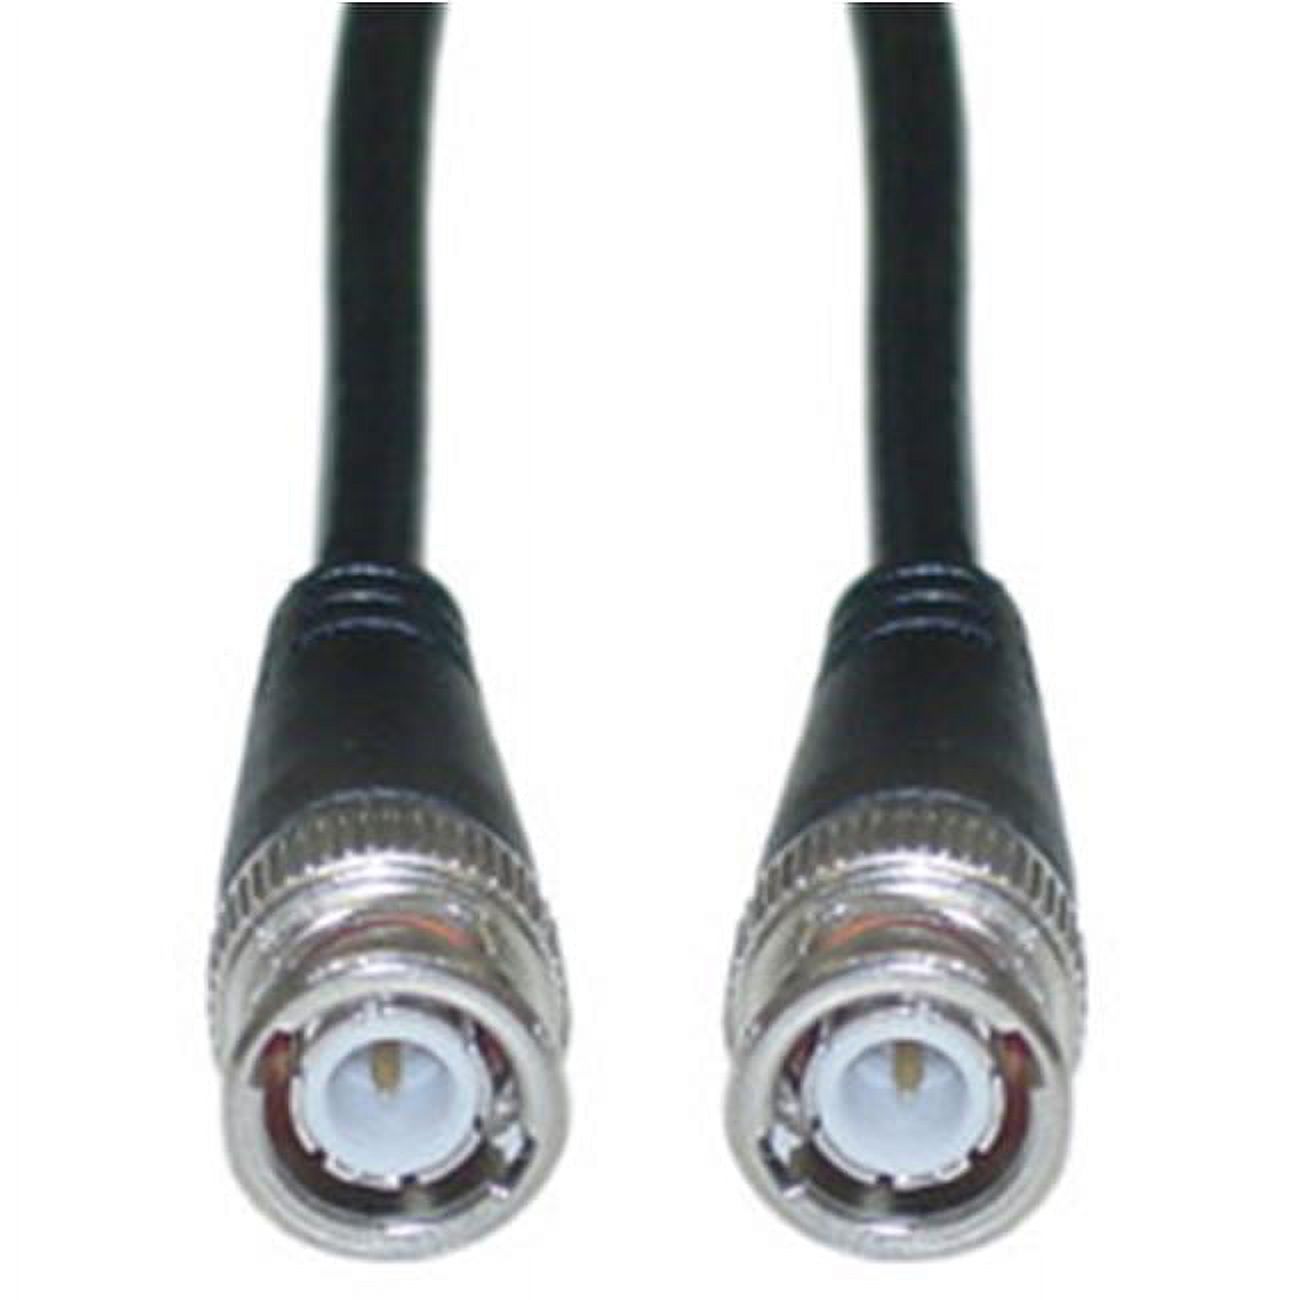 CableWholesale 10X1-01150 BNC RG58  AU Coaxial Cable  Black  BNC Male  Copper Stranded Center Conductor  50 foot - image 1 of 2